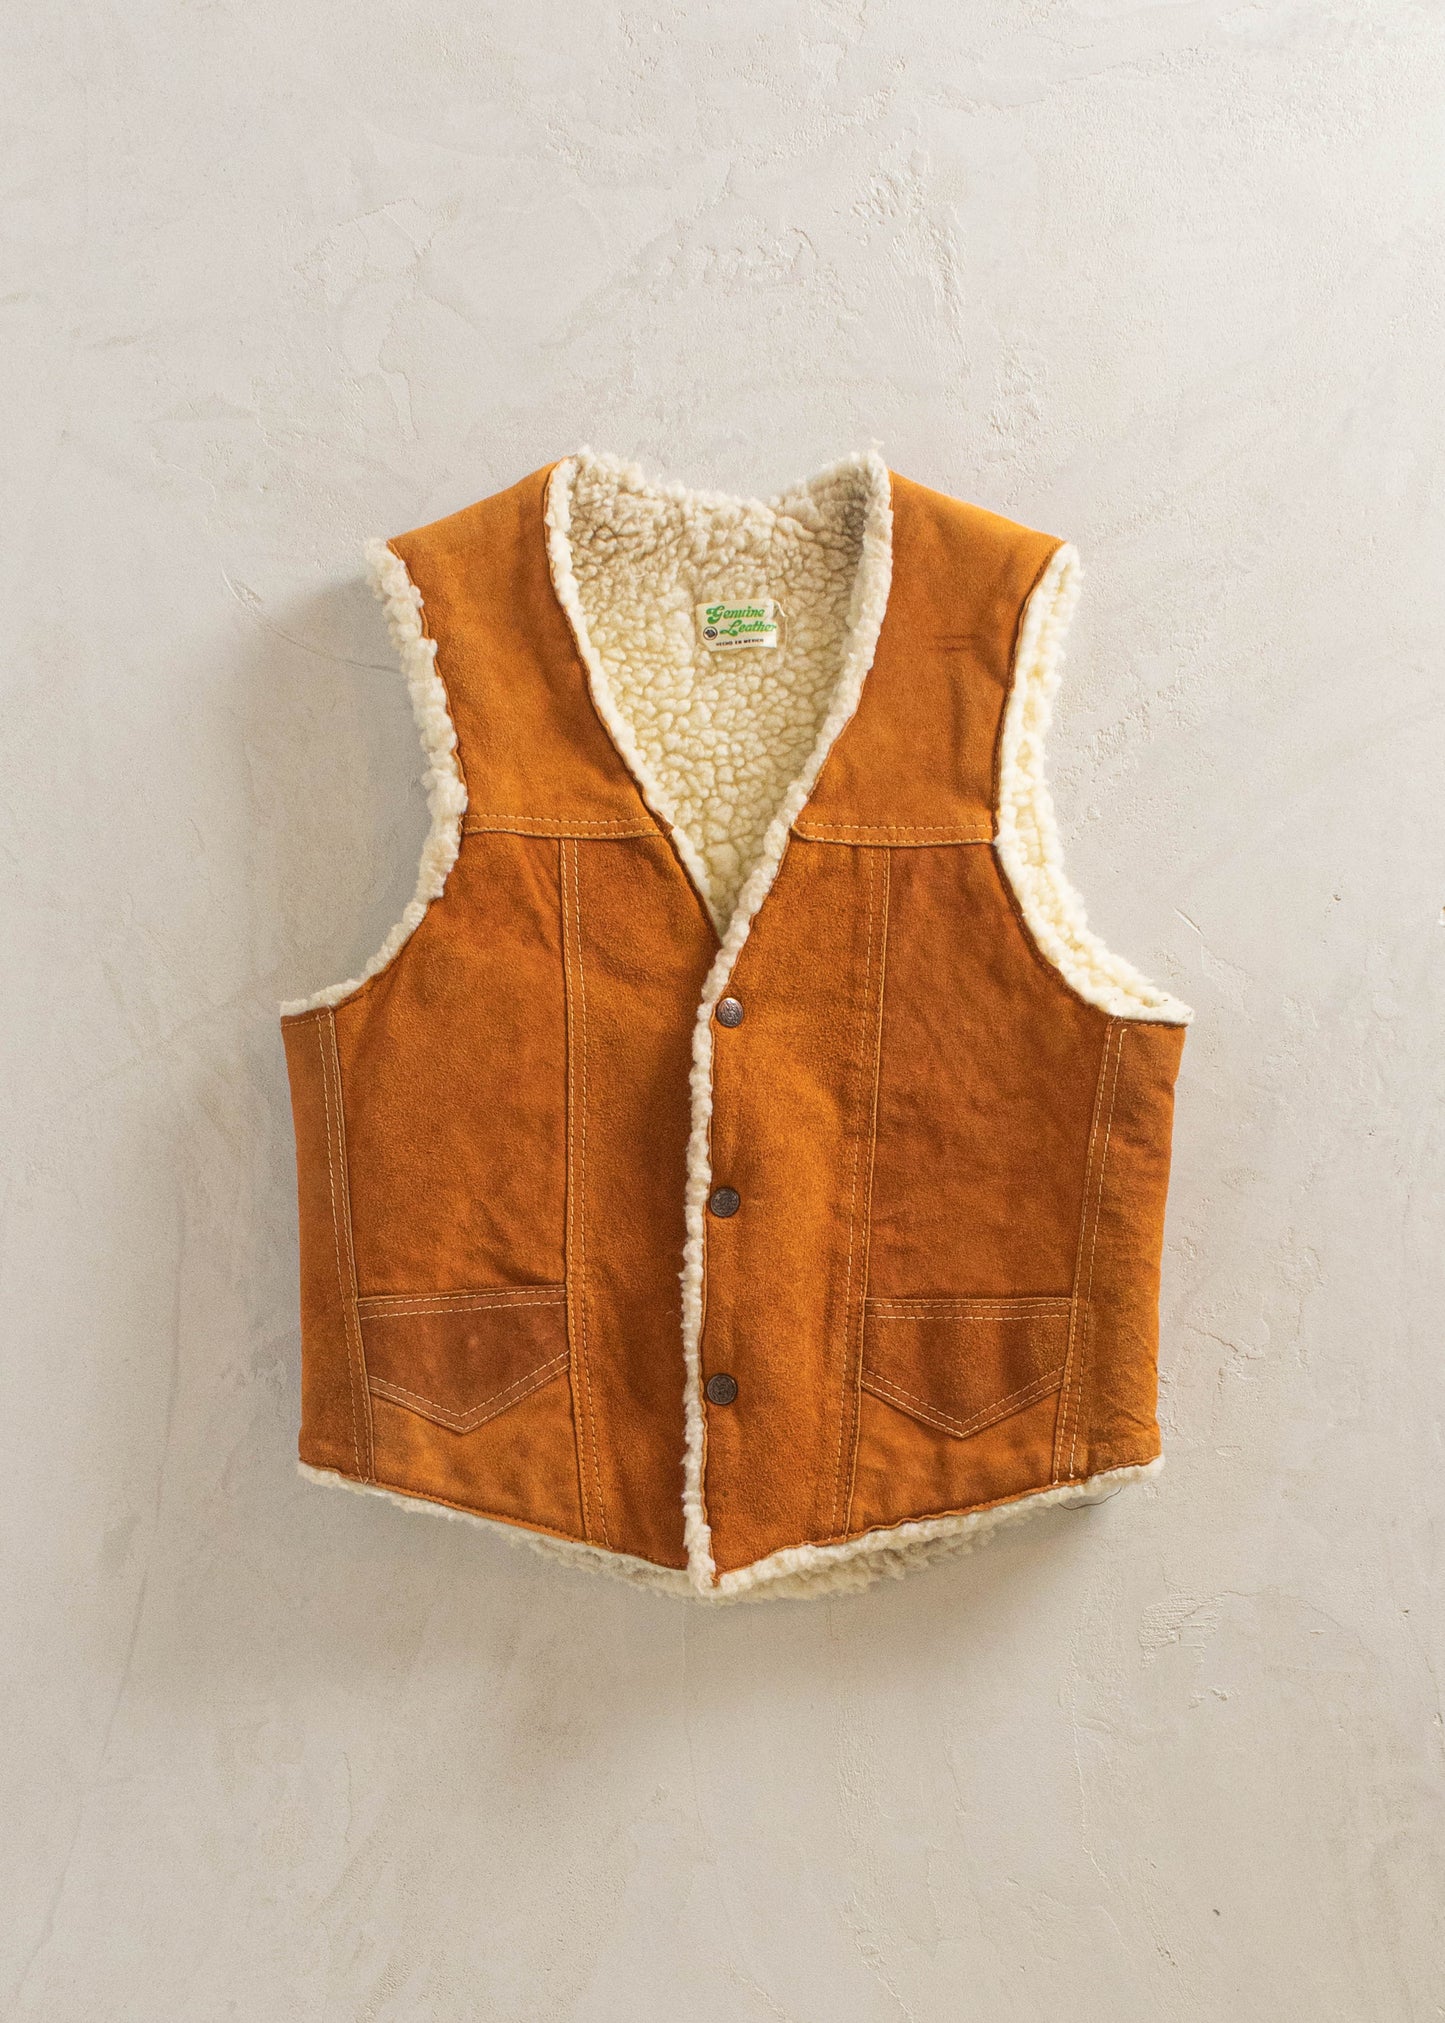 1970s Genuine Leather Sherpa Lined Suede Vest Size XS/S